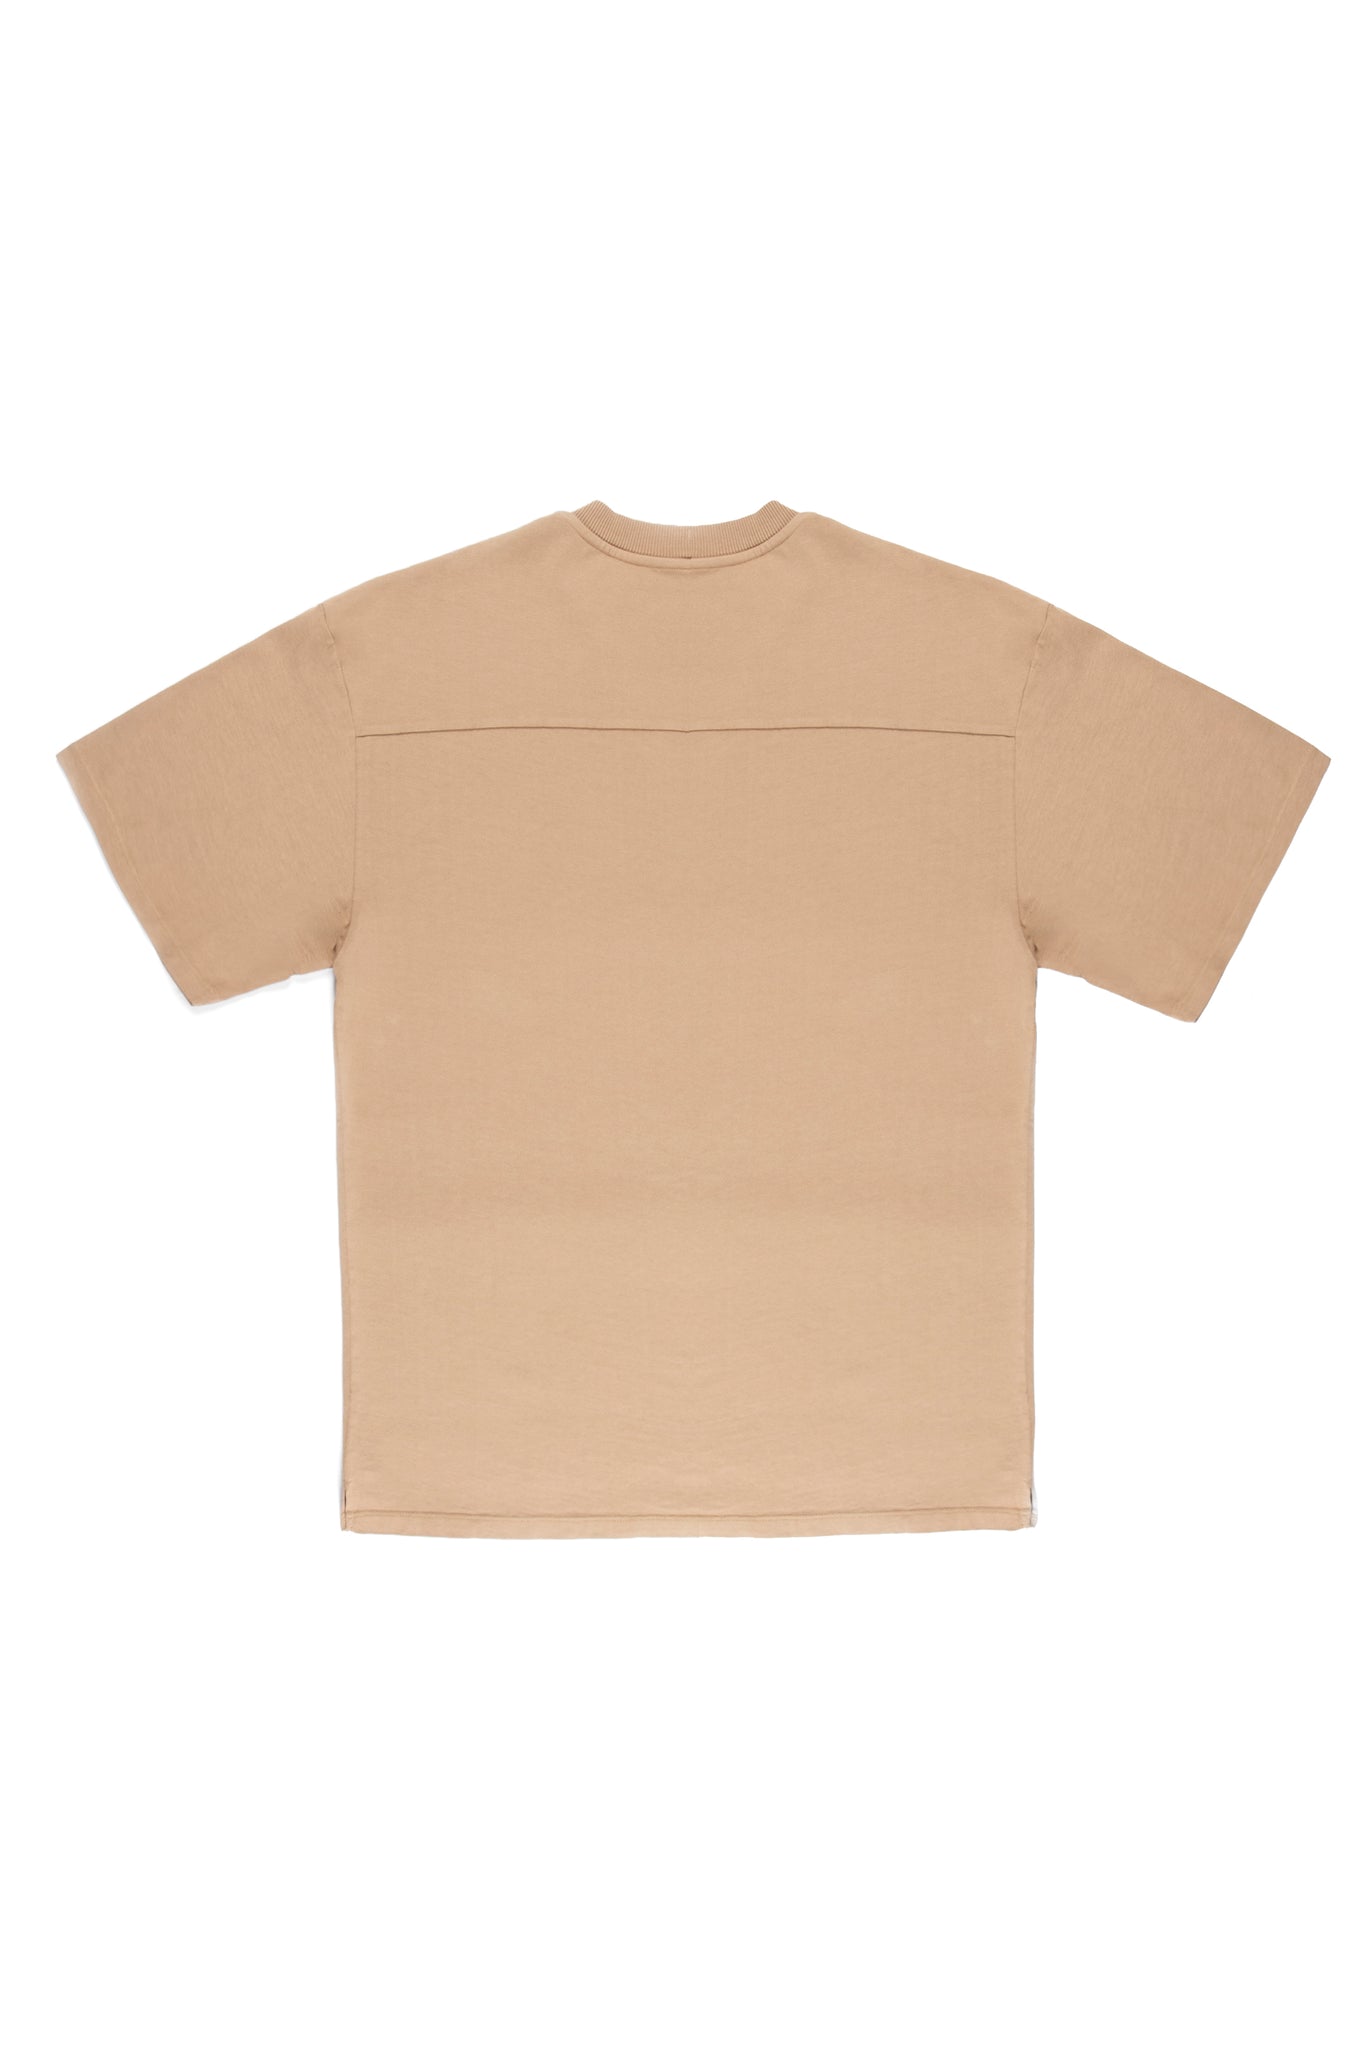 Grecco T-Shirt in Light Camel